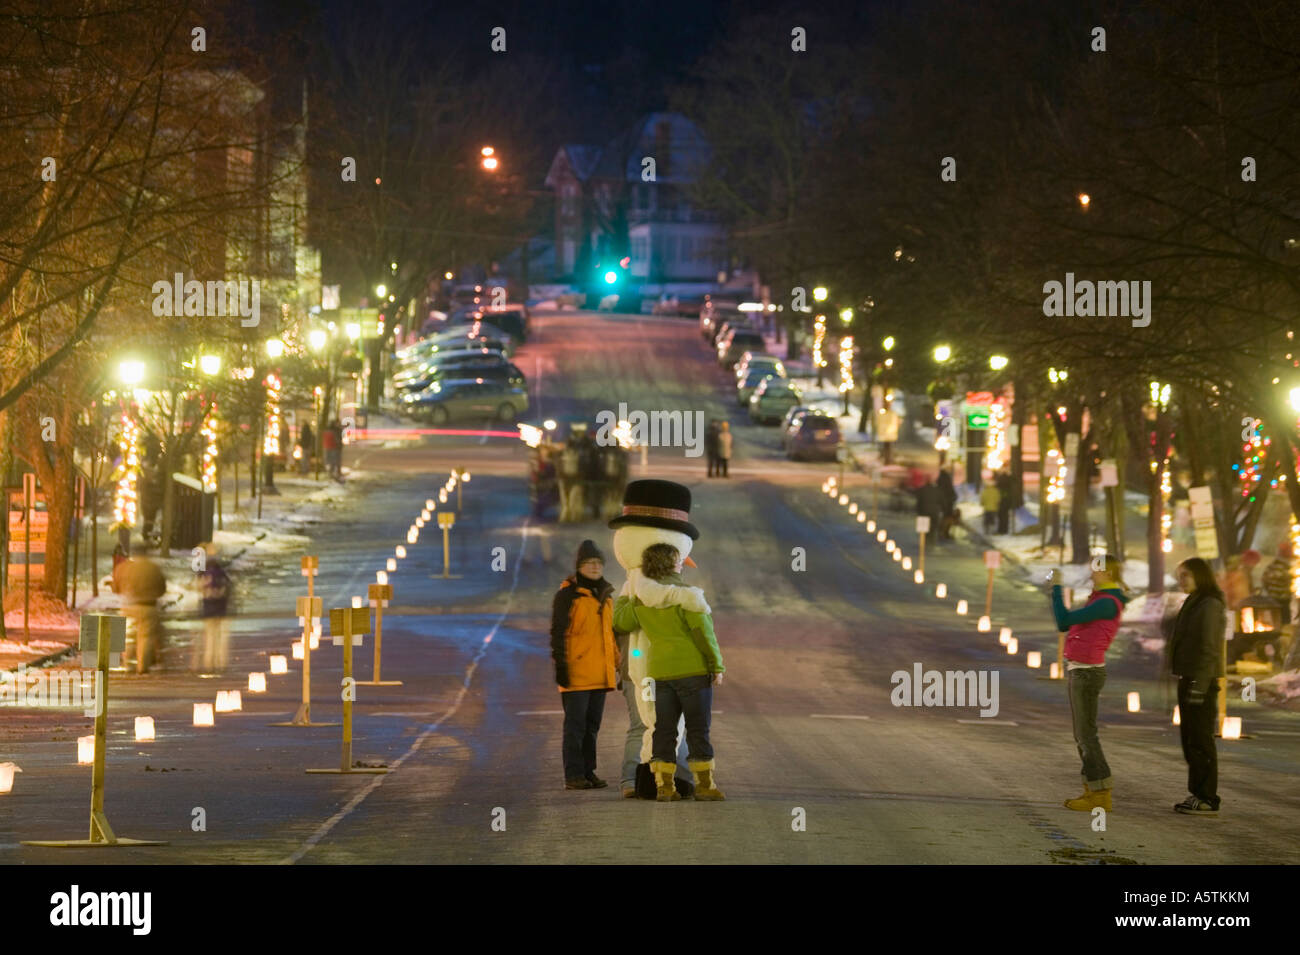 Candlelight stroll Christmas time Cooperstown New York luminaries on Main Street and snowman Stock Photo